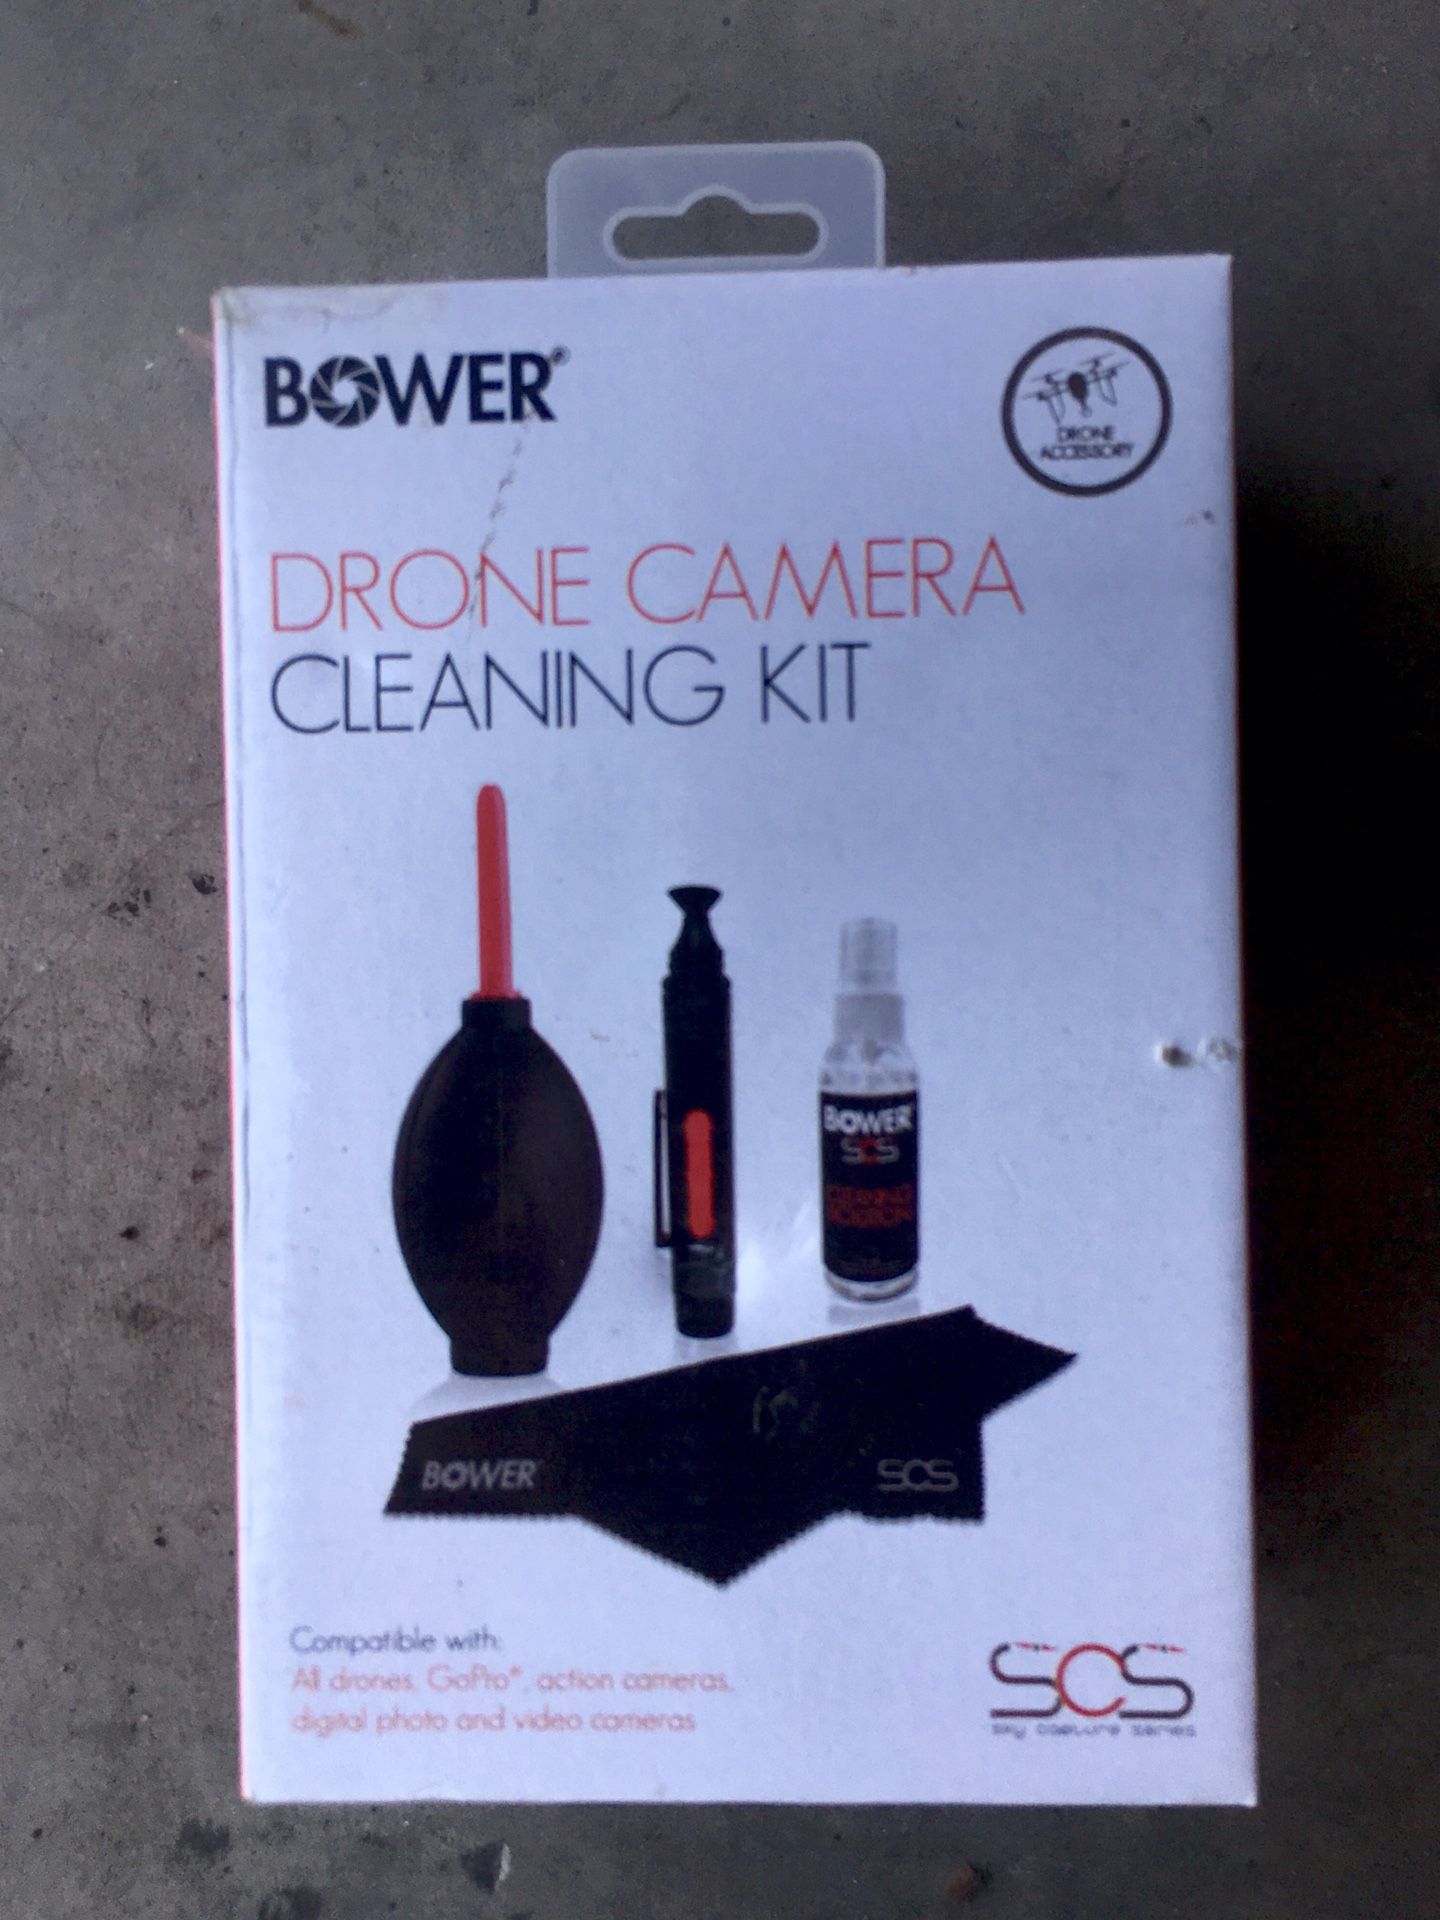 Drone camera cleaning kit